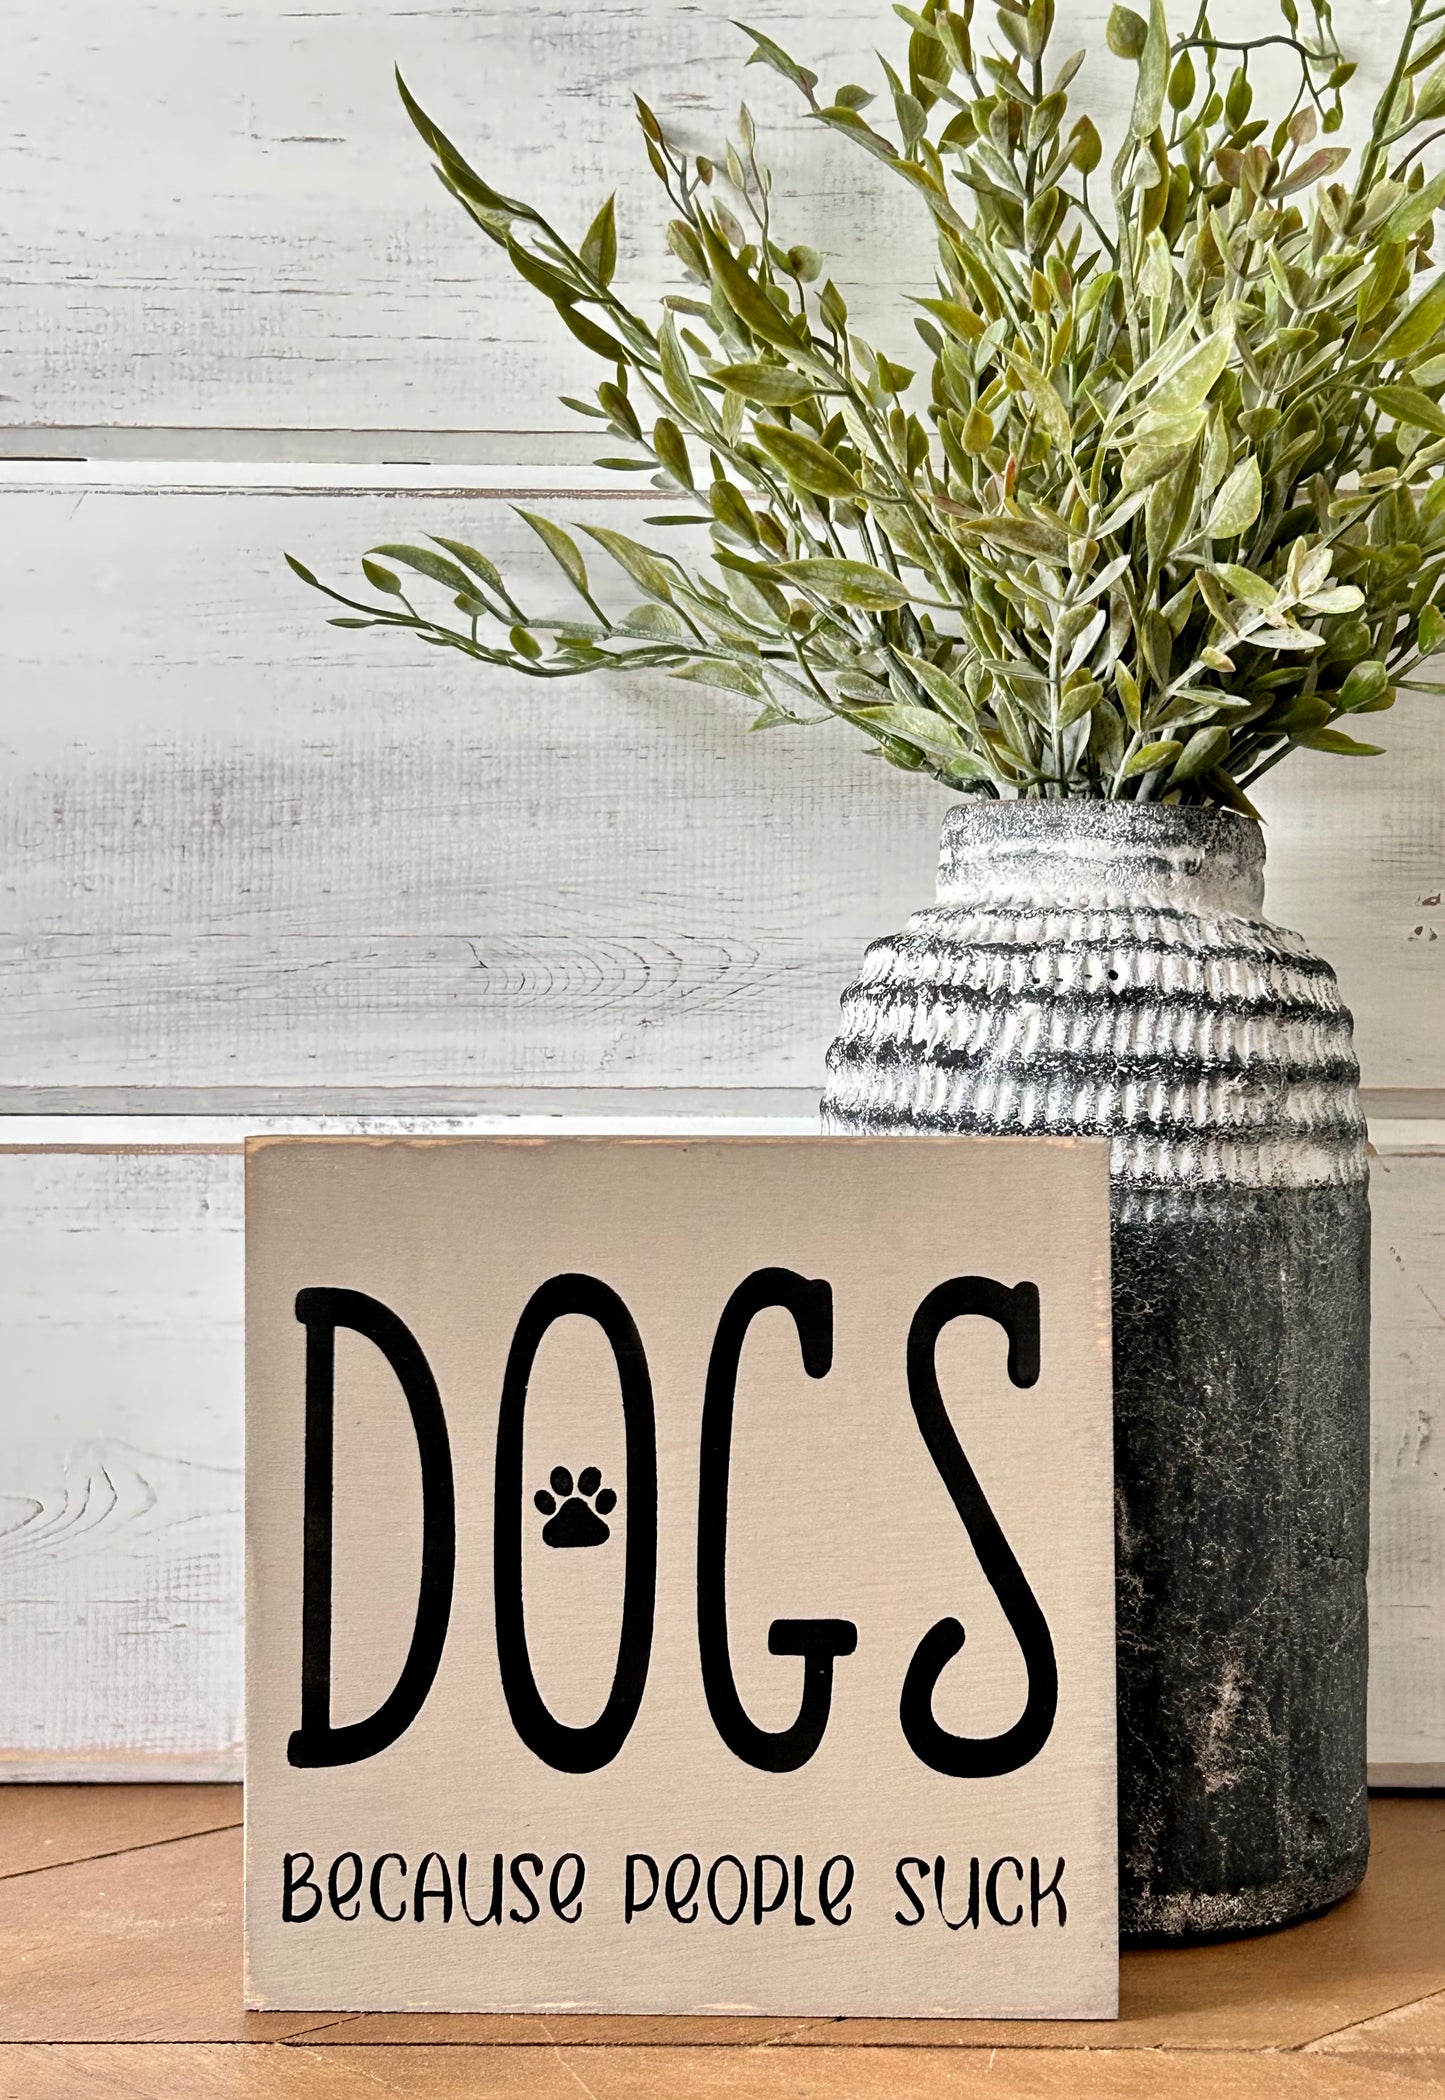 Dogs Because People Suck - Rustic Wood Shelf Sitter